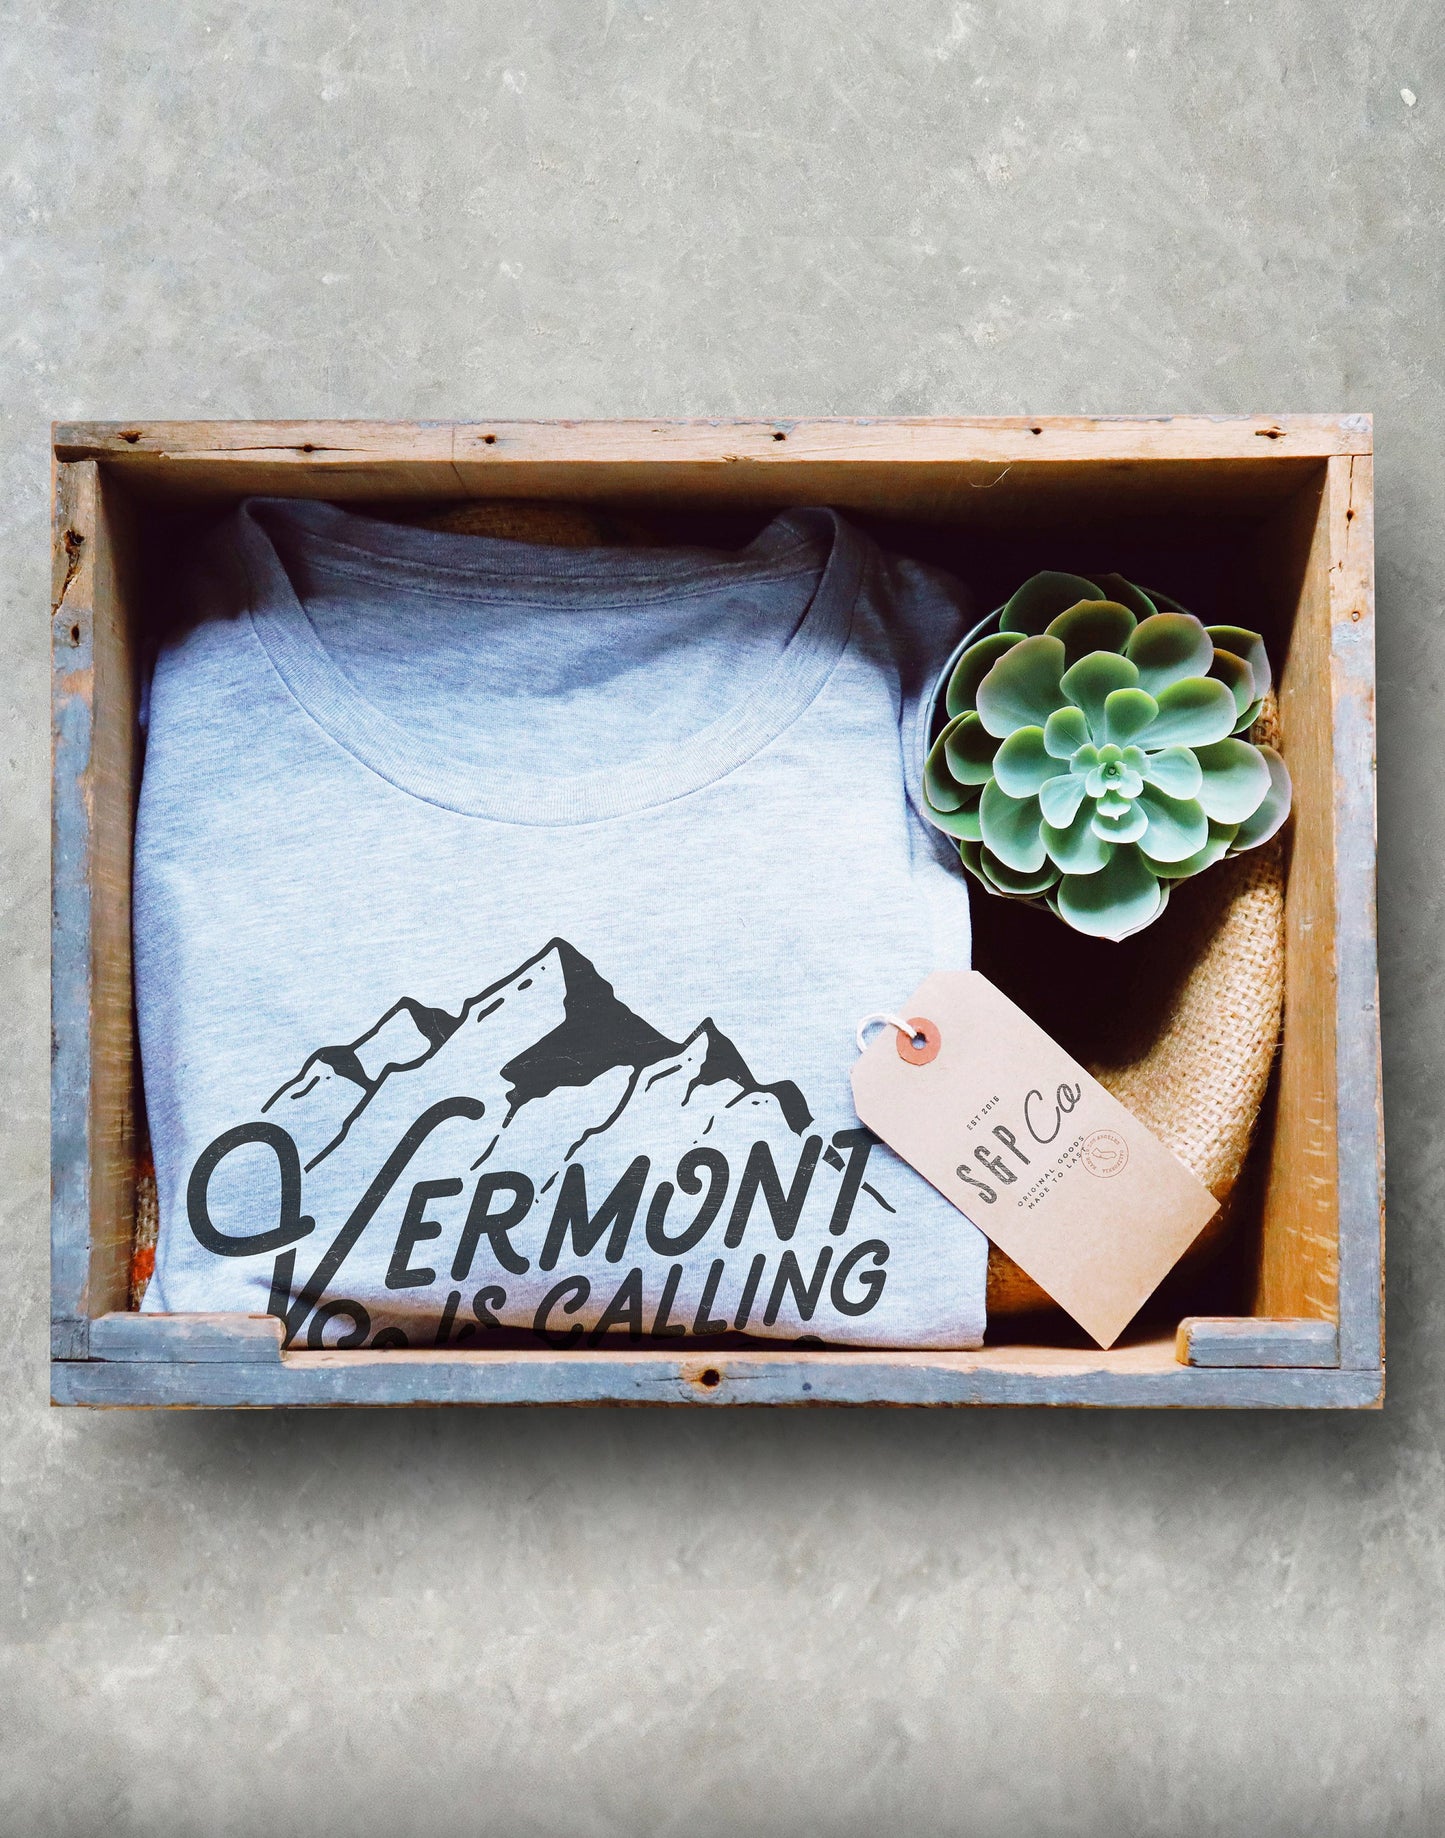 Vermont Is Calling Unisex Shirt - Vermont State Shirt, VT Home Shirt, Green Mountain Shirt, Vermont Gifts, Montpelier Shirt, New England